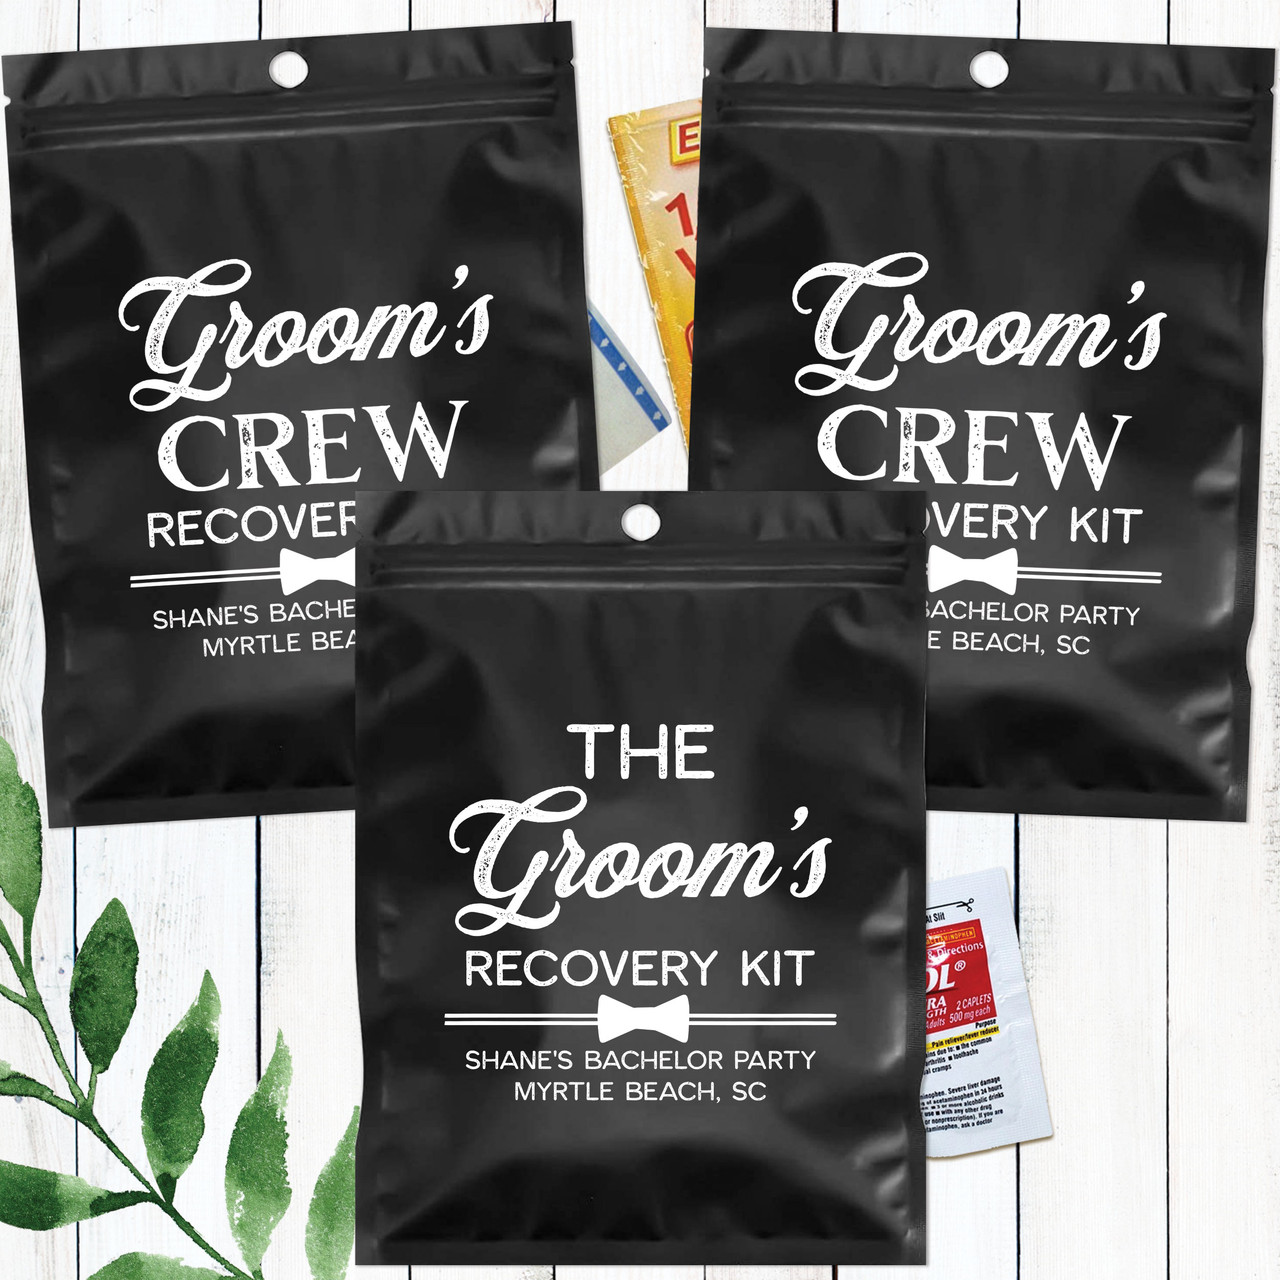 https://cdn11.bigcommerce.com/s-5grzuu6/images/stencil/1280x1280/products/6142/47823/Grooms-Crew-Bachelor_Party_Favor_Bags-Hangover_Recovery-Kits__85053.1651868702.jpg?c=2